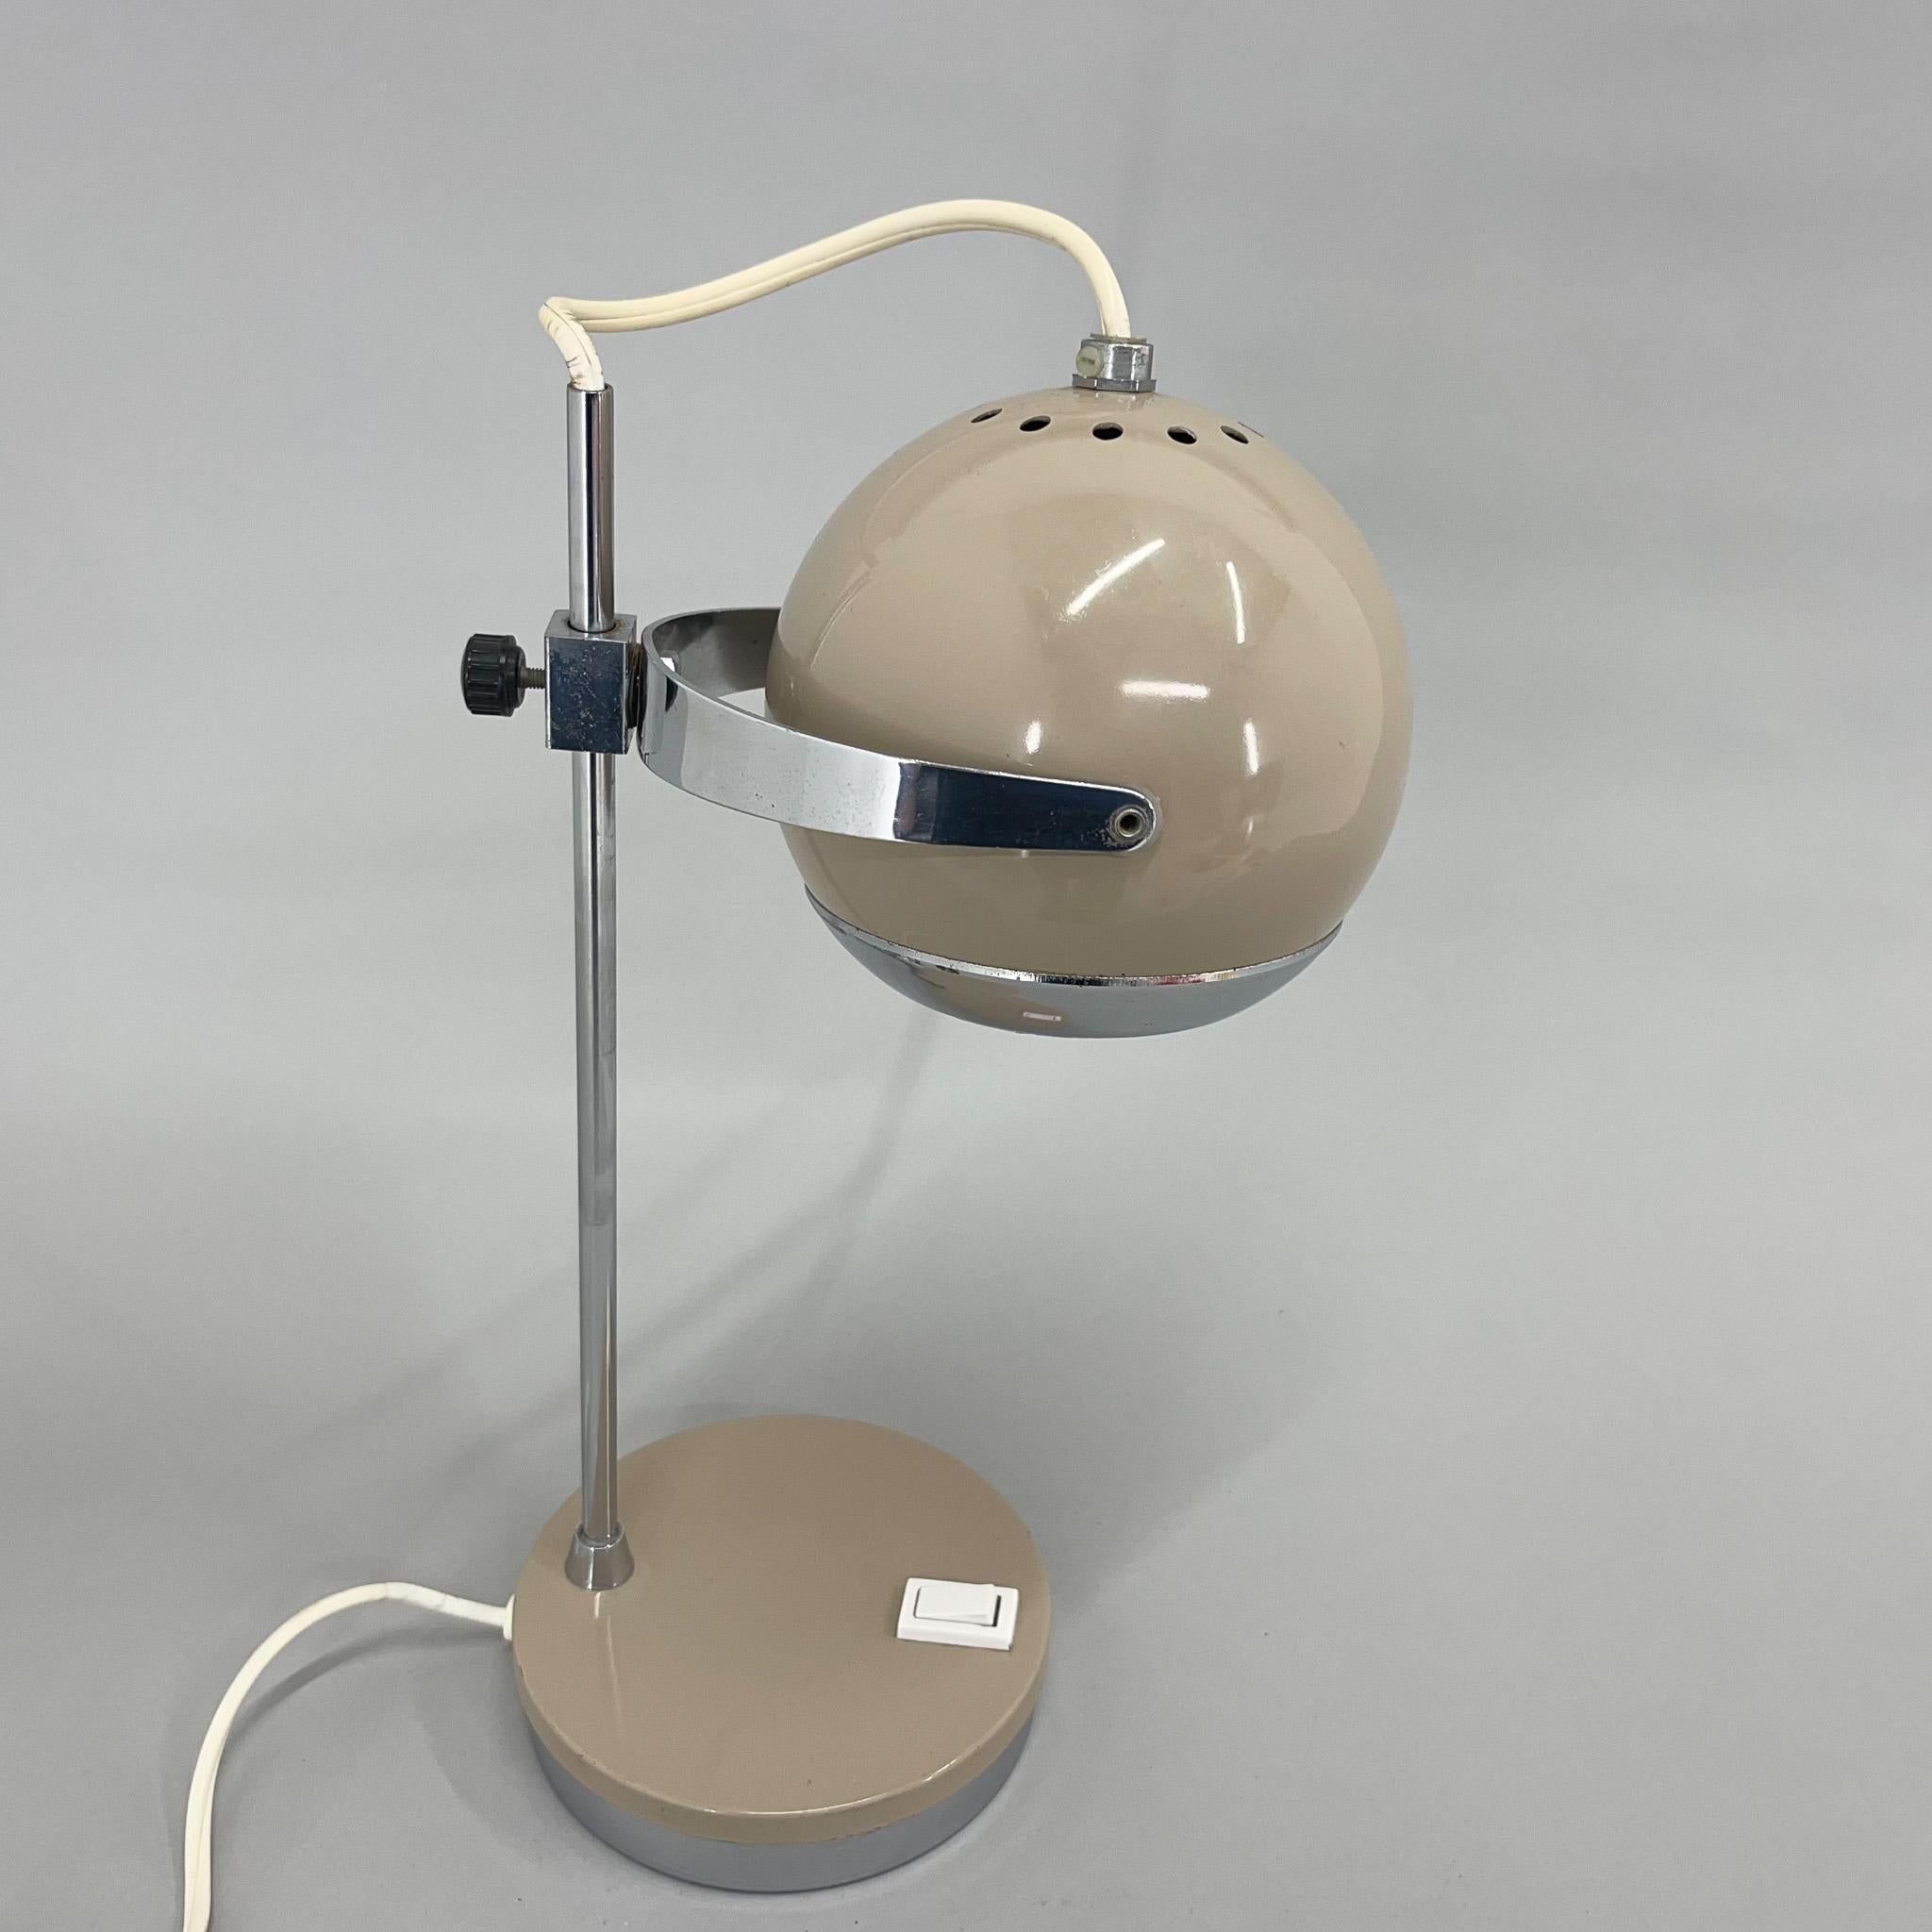 Vintage Space age italian table lamp. The lampshade resembles an eyeball and is adjustable in all directions, up, down and sideways.